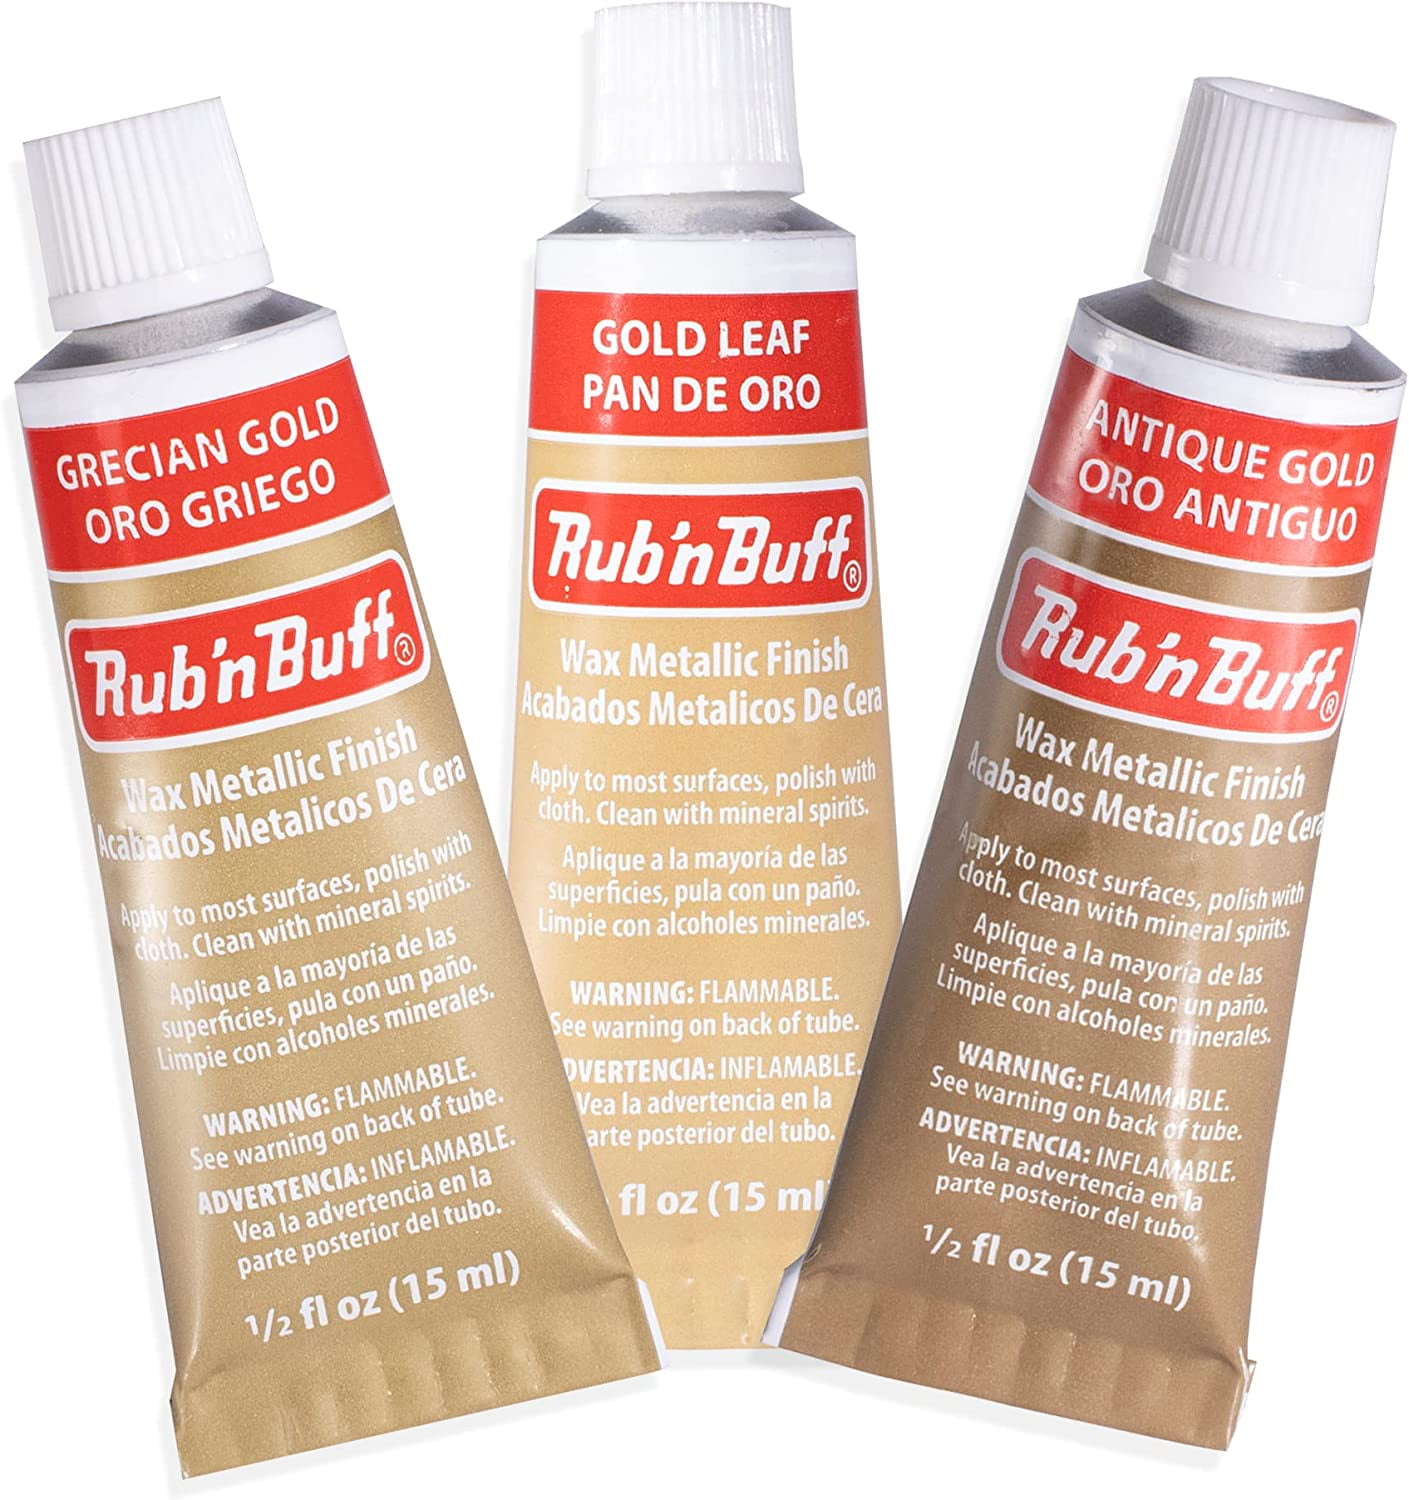 Amaco Rub N Buff Wax Metallic Finish 3 Color Kit - Antique Gold Grecian Gold and Gold Leaf 15ml Tubes - Versatile Gilding Wax for Finishing